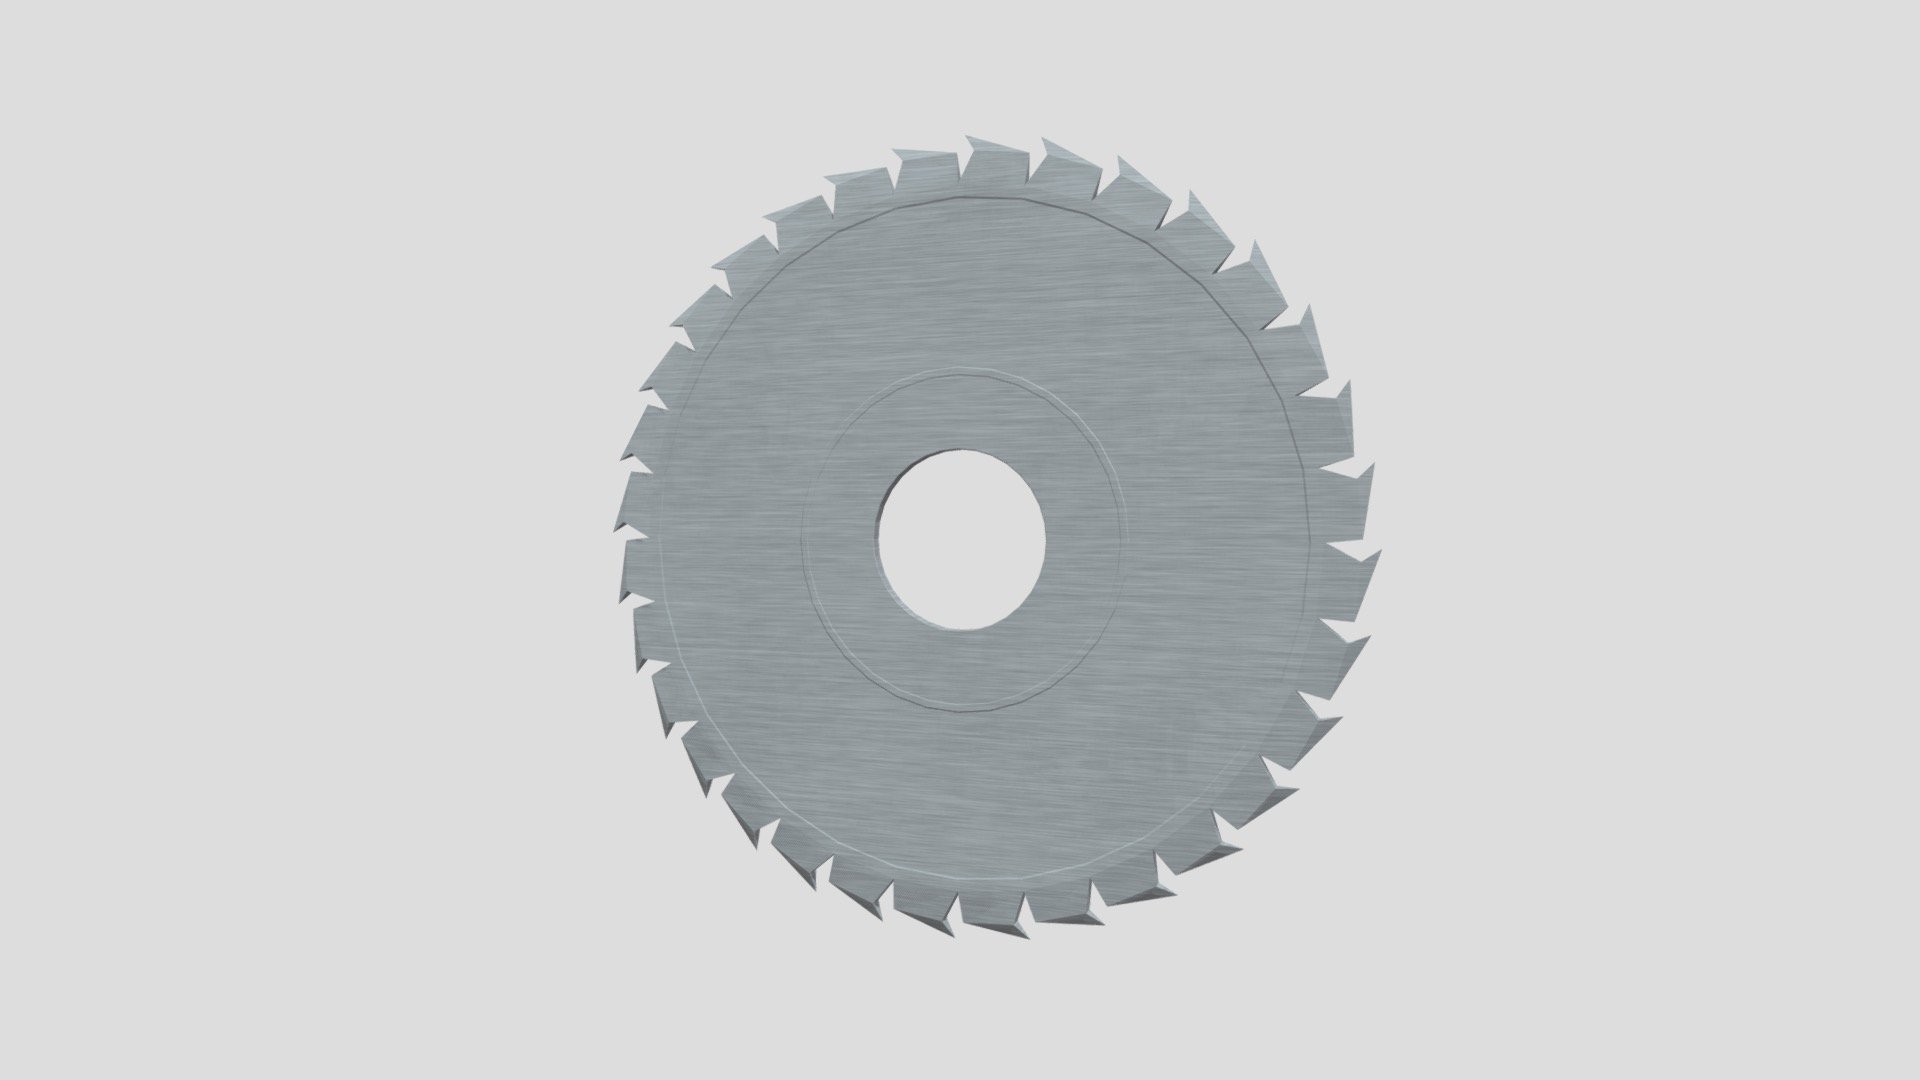 Textures: 2048 x 2048, Two colors on texture: White and Grey.

Has Normal Map: 2048 x 2048. 

Materials: 1 - Circular Saw Blade

Flat shaded.

Mirrored.

Subdivision Level: 0

Origin located on middle-center.

Polygons: 2472

Vertices: 1156

Formats: Fbx Stl.

I hope you enjoy the model! - Circular Saw Blade - Buy Royalty Free 3D model by Ed+ (@EDplus) 3d model